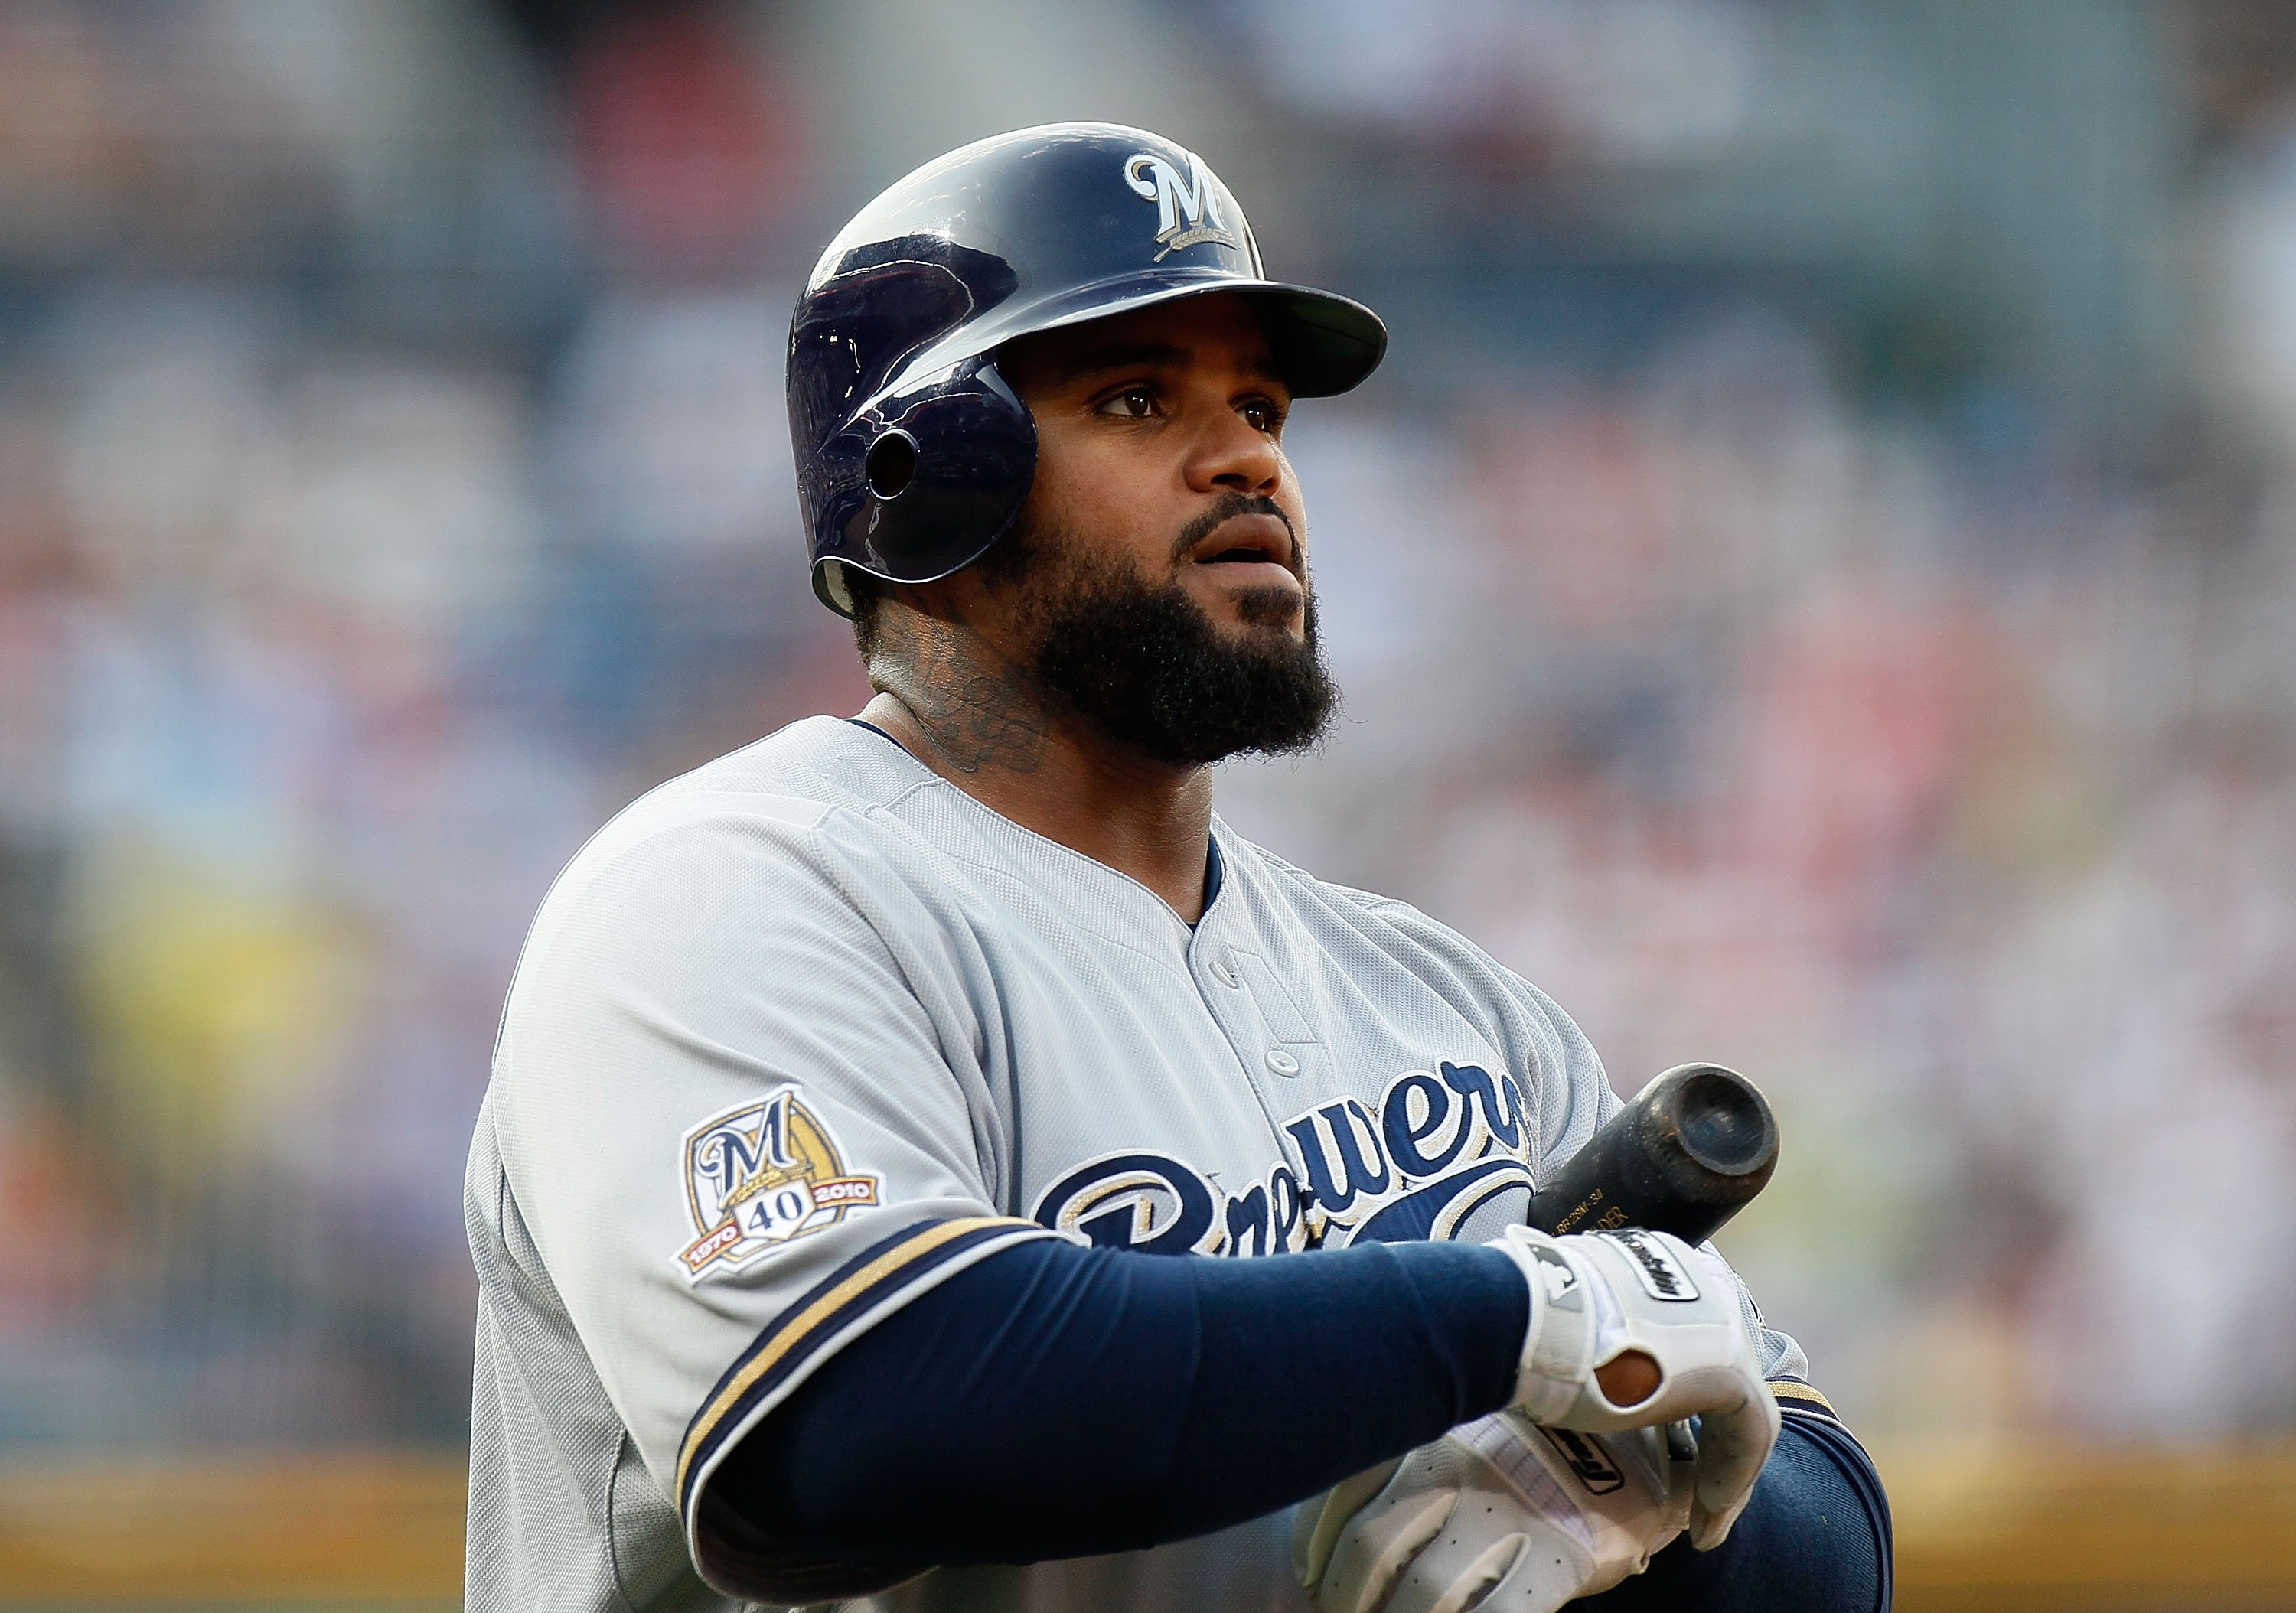 82nd All-Star Game: Prince Fielder has a blast in NL victory - The